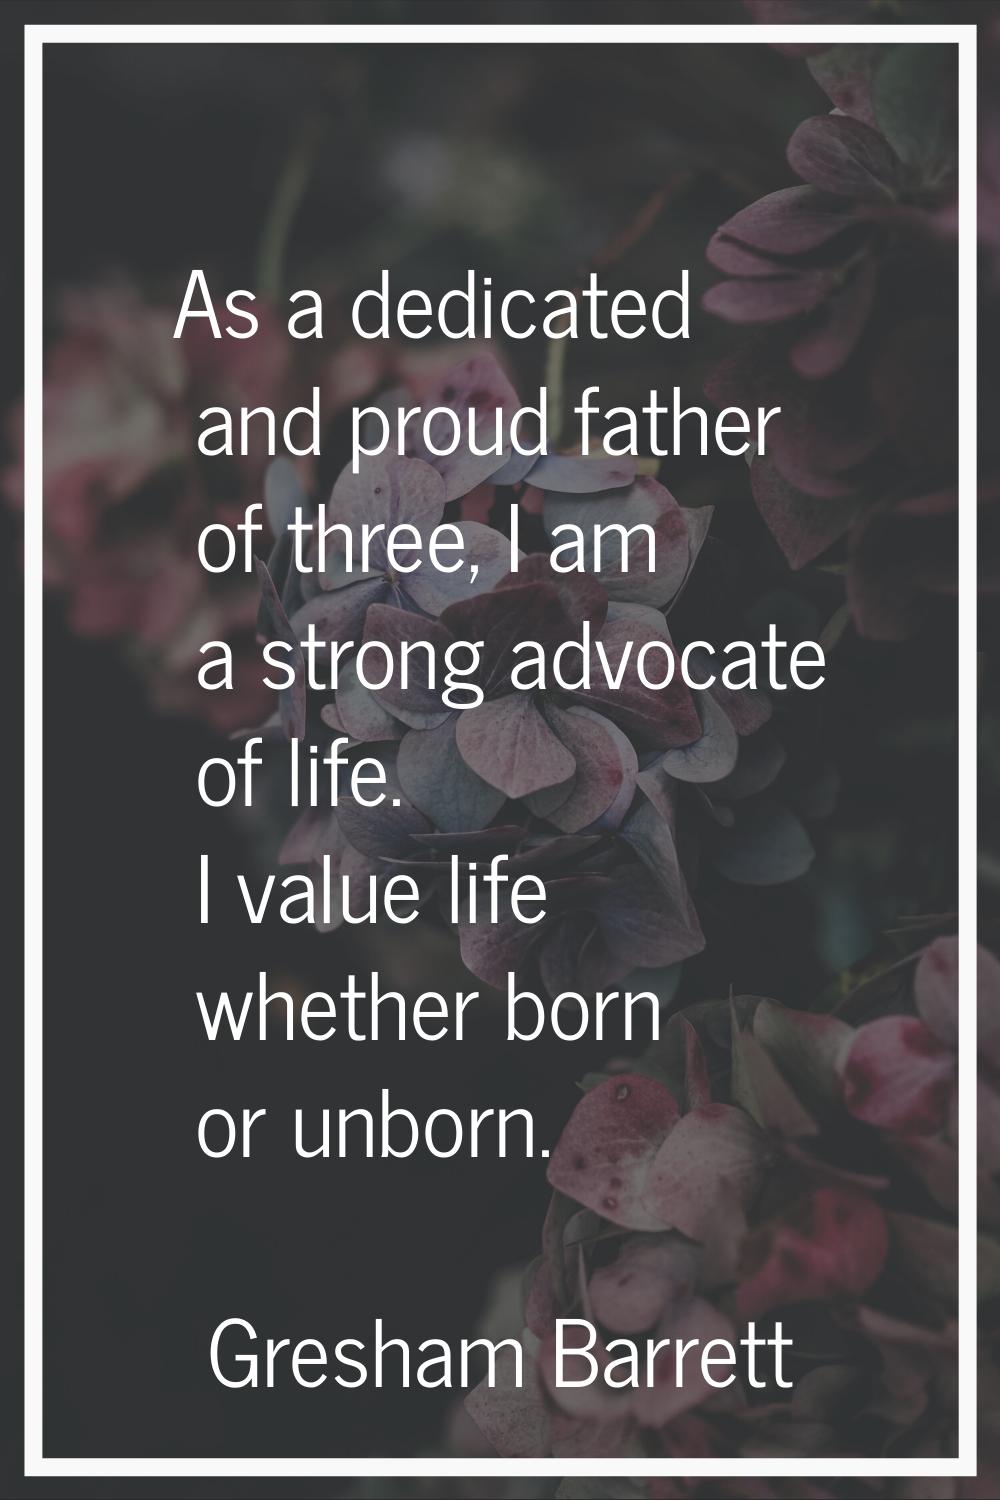 As a dedicated and proud father of three, I am a strong advocate of life. I value life whether born